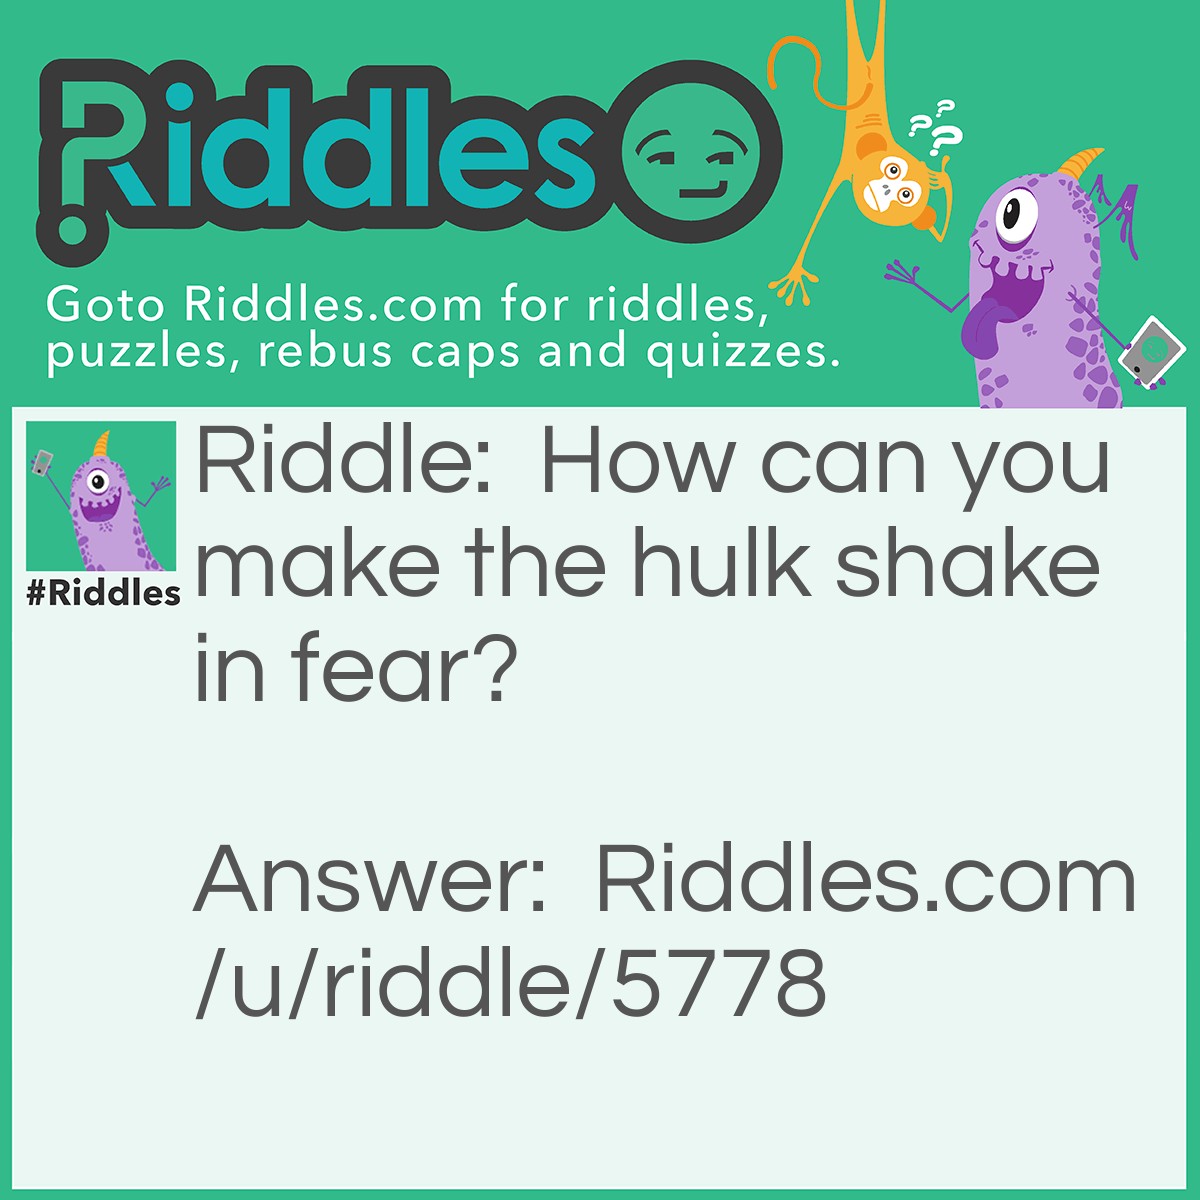 Riddle: How can you make the hulk shake in fear? Answer: Introduce him to chuck norris.